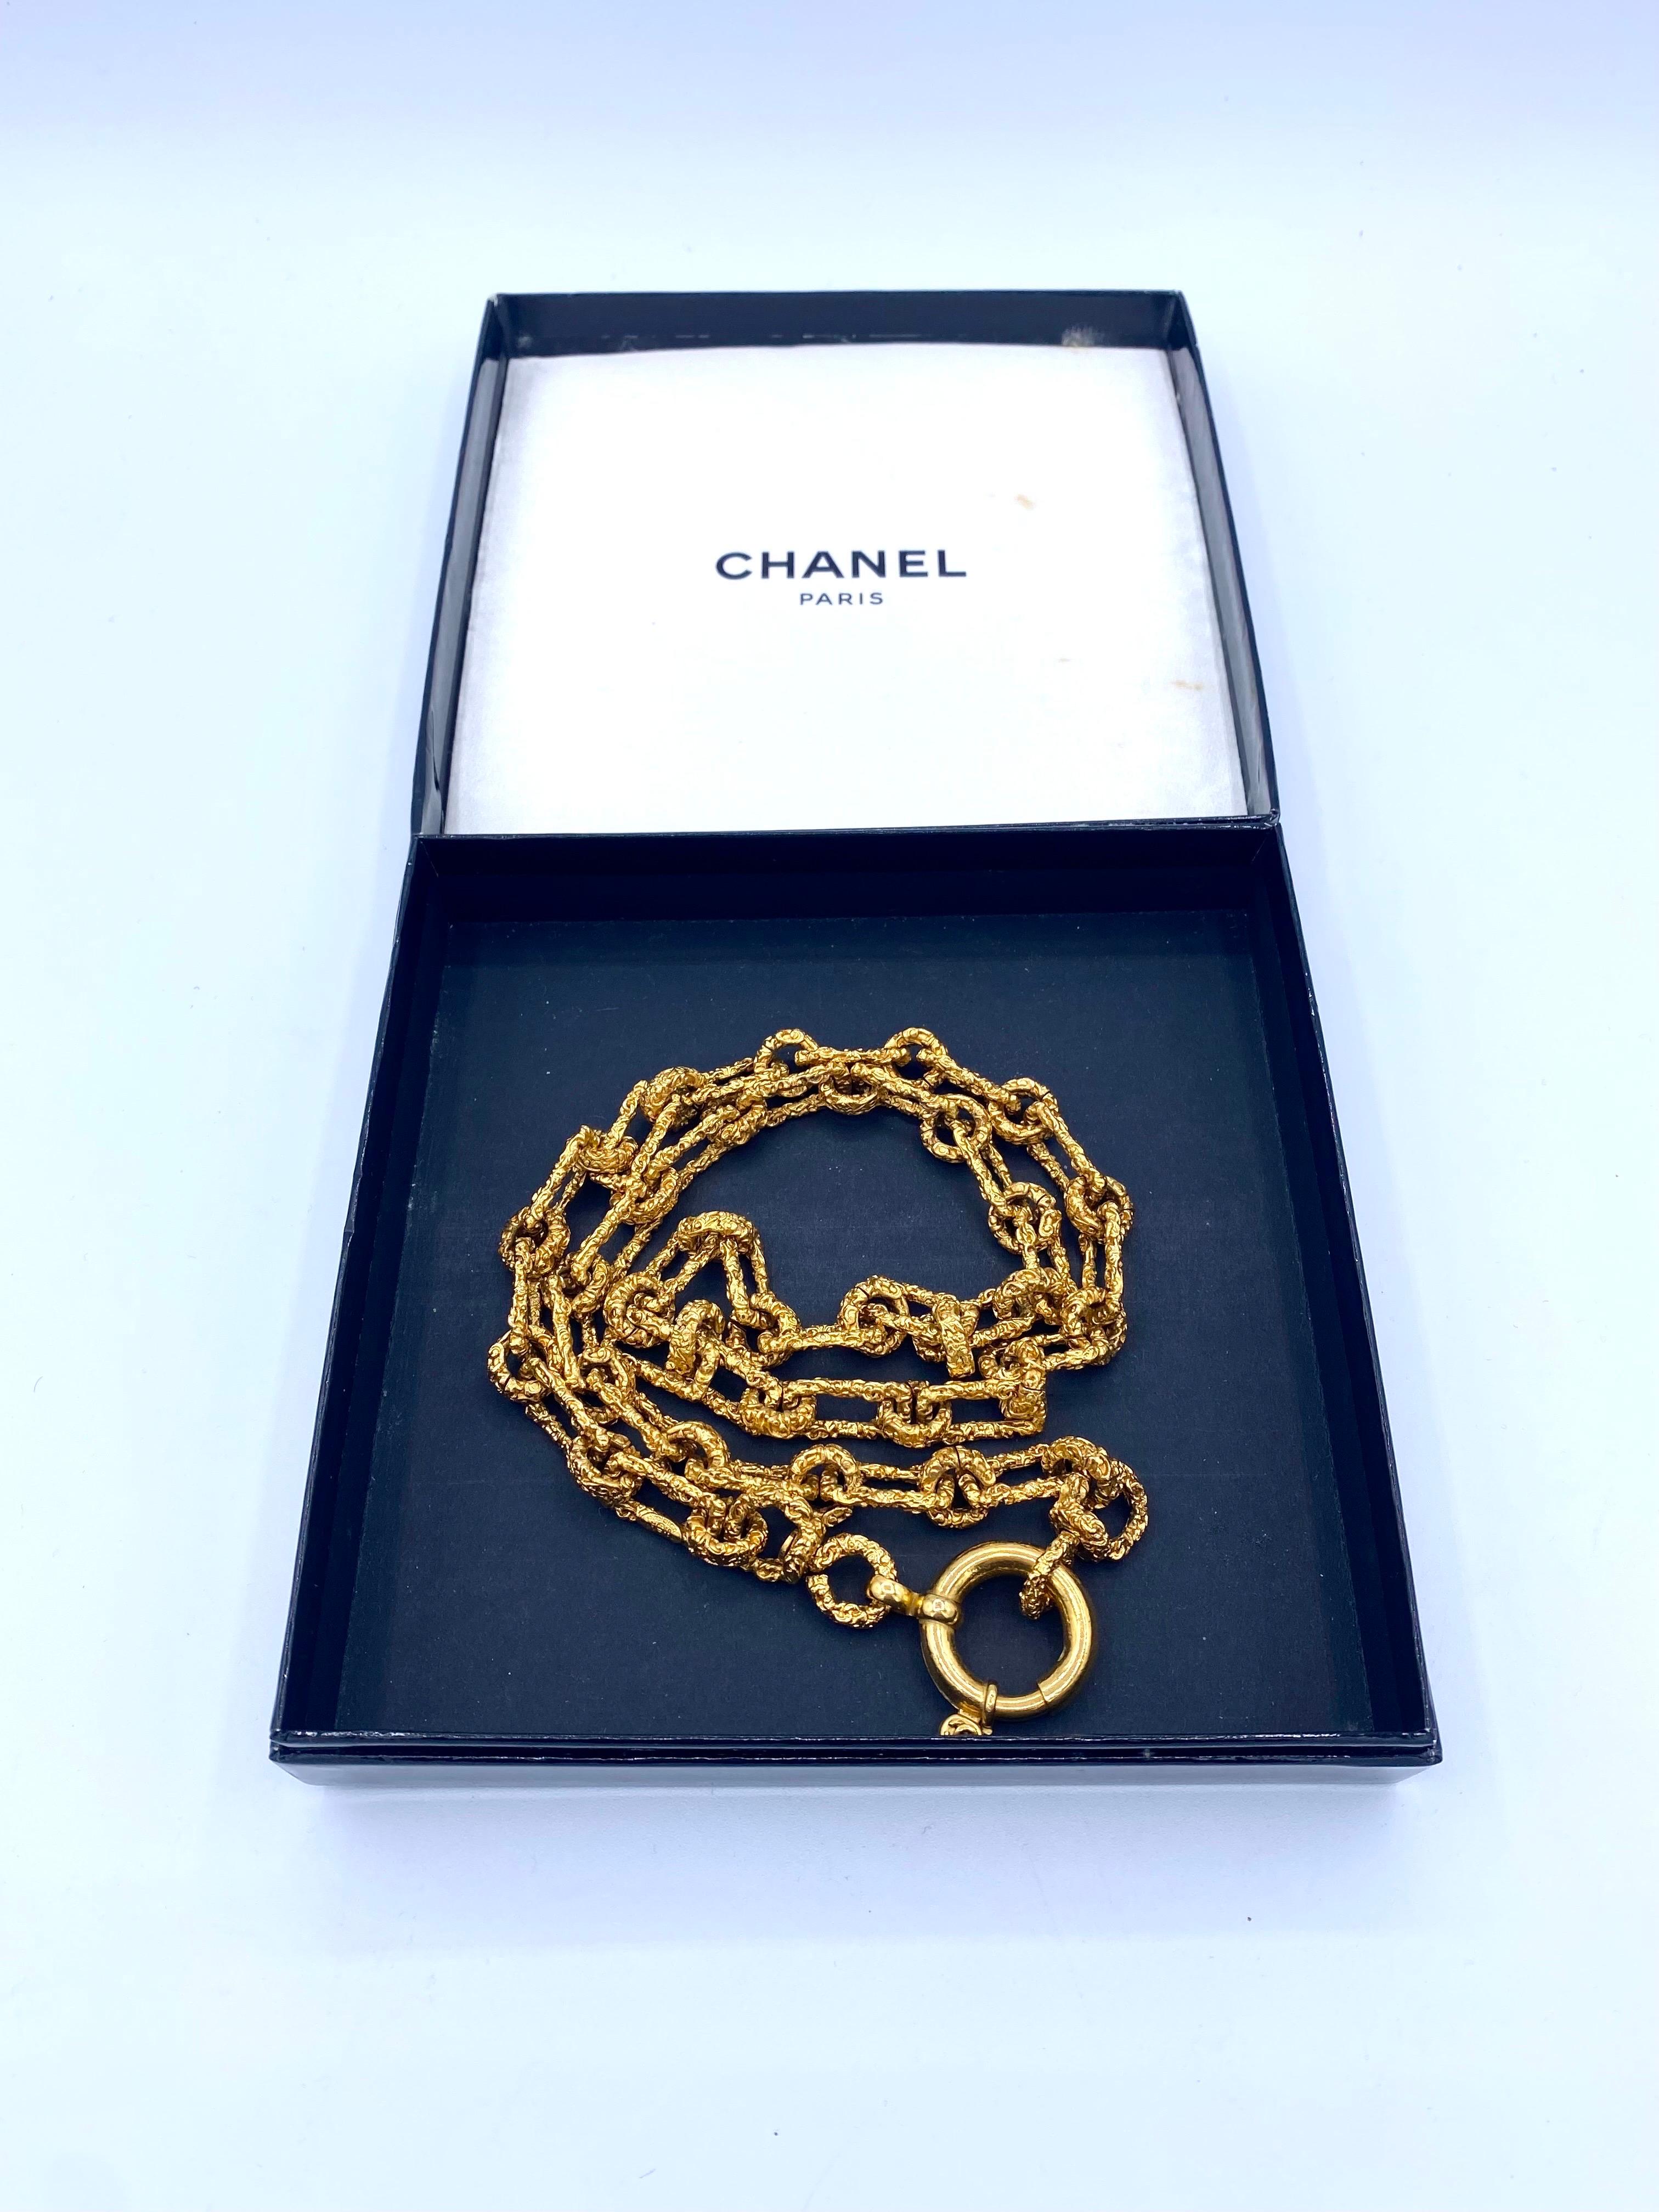 Vintage Chanel necklace from 1990 gold chain textured and intertwined CC pattern 5